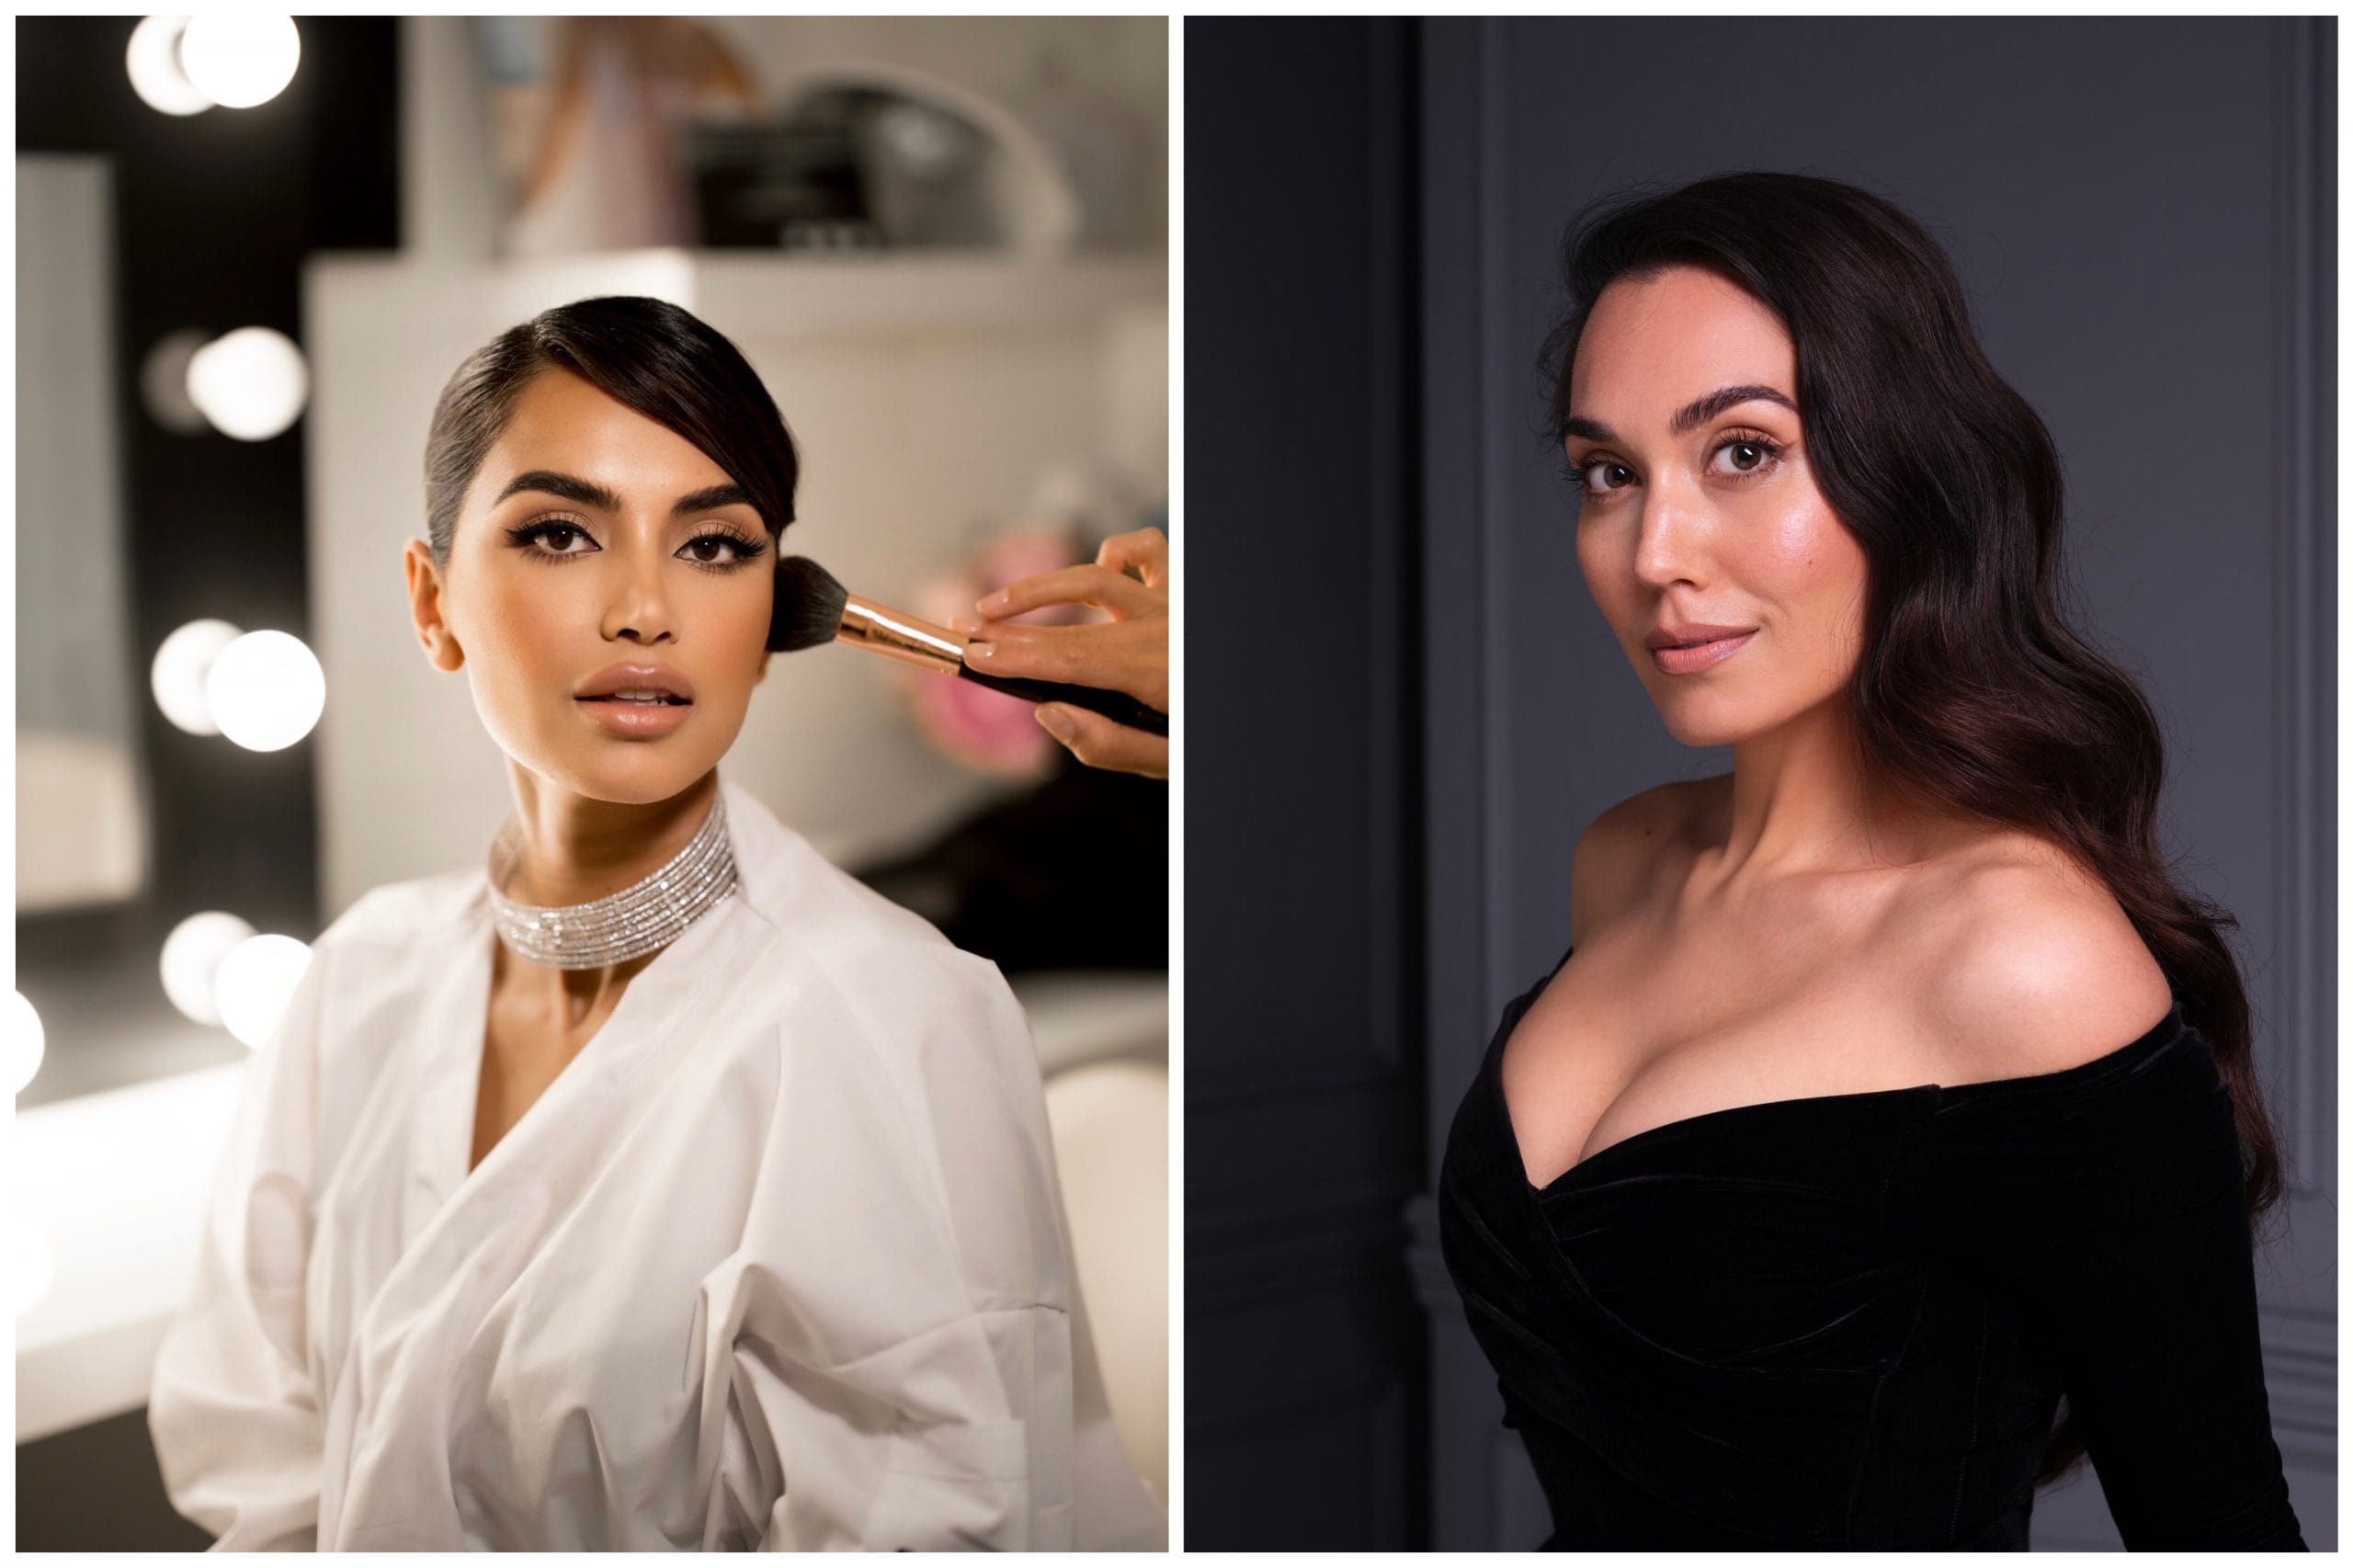 A Makeup Artist Shares Her Glam MAKE UP FOR EVER Routine